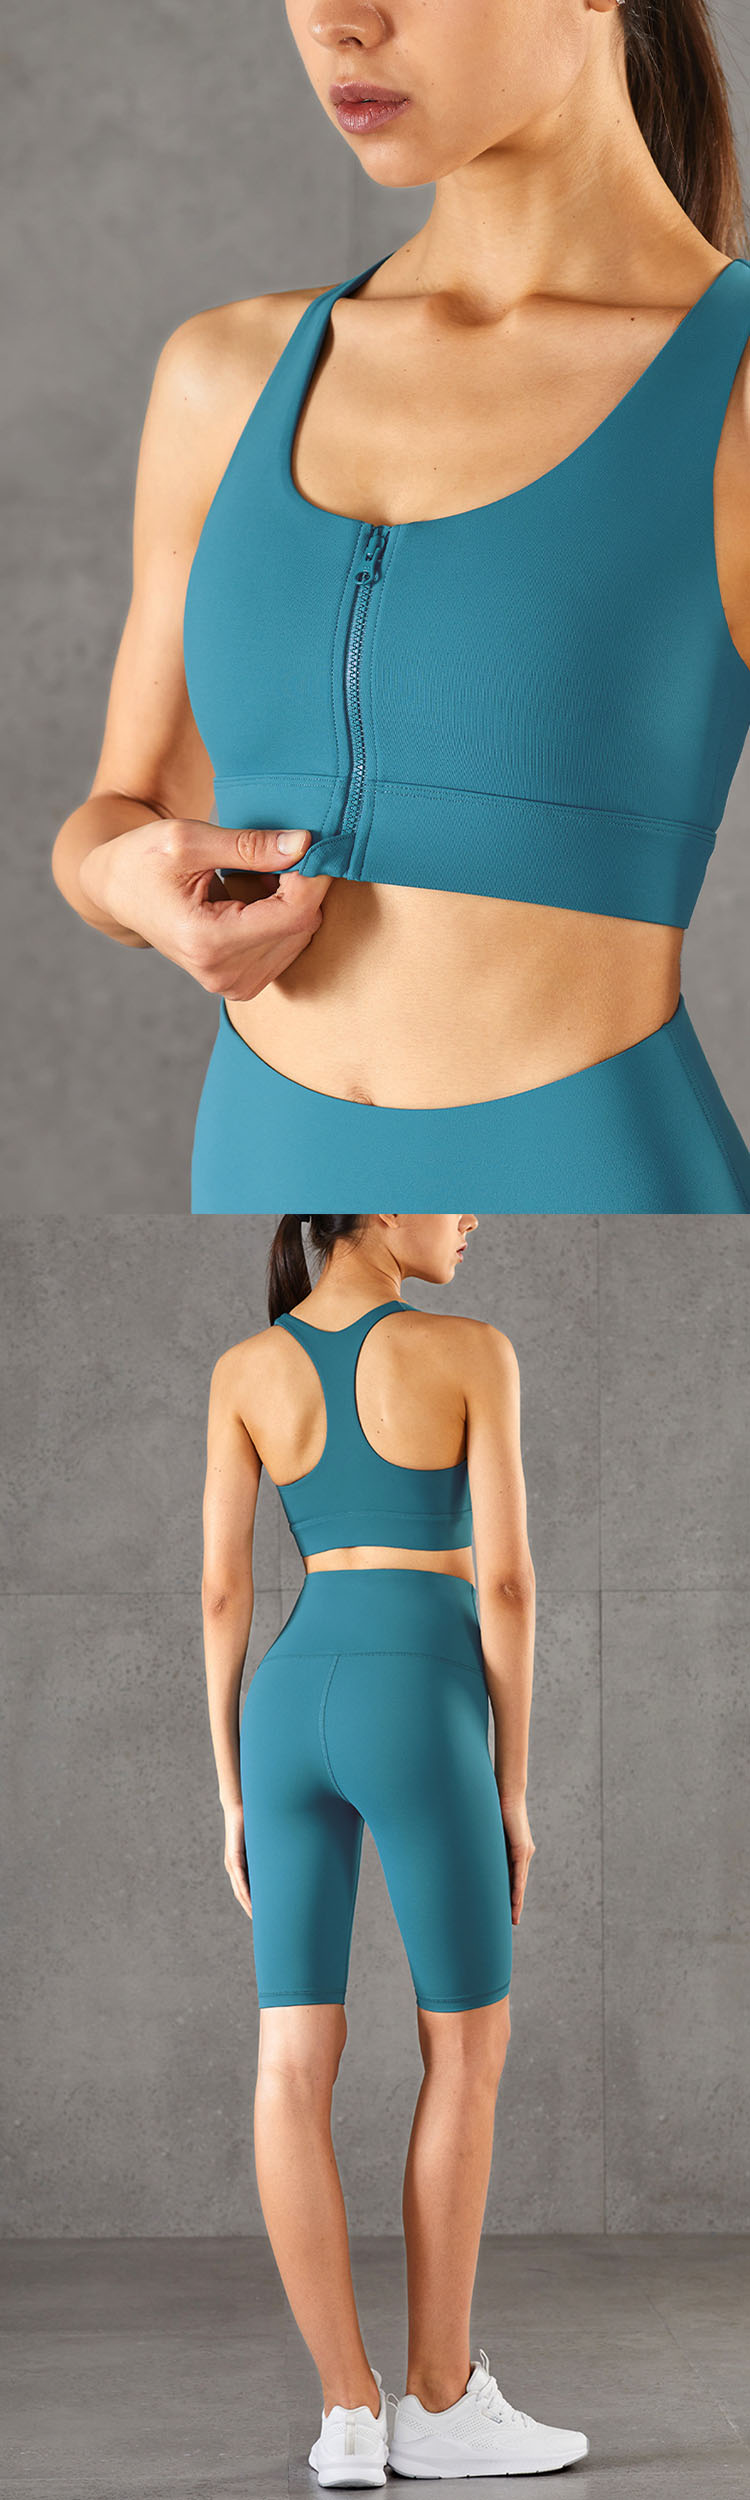 The front design of racerback bra for large bust is so intuitive that we often forget the design of the back